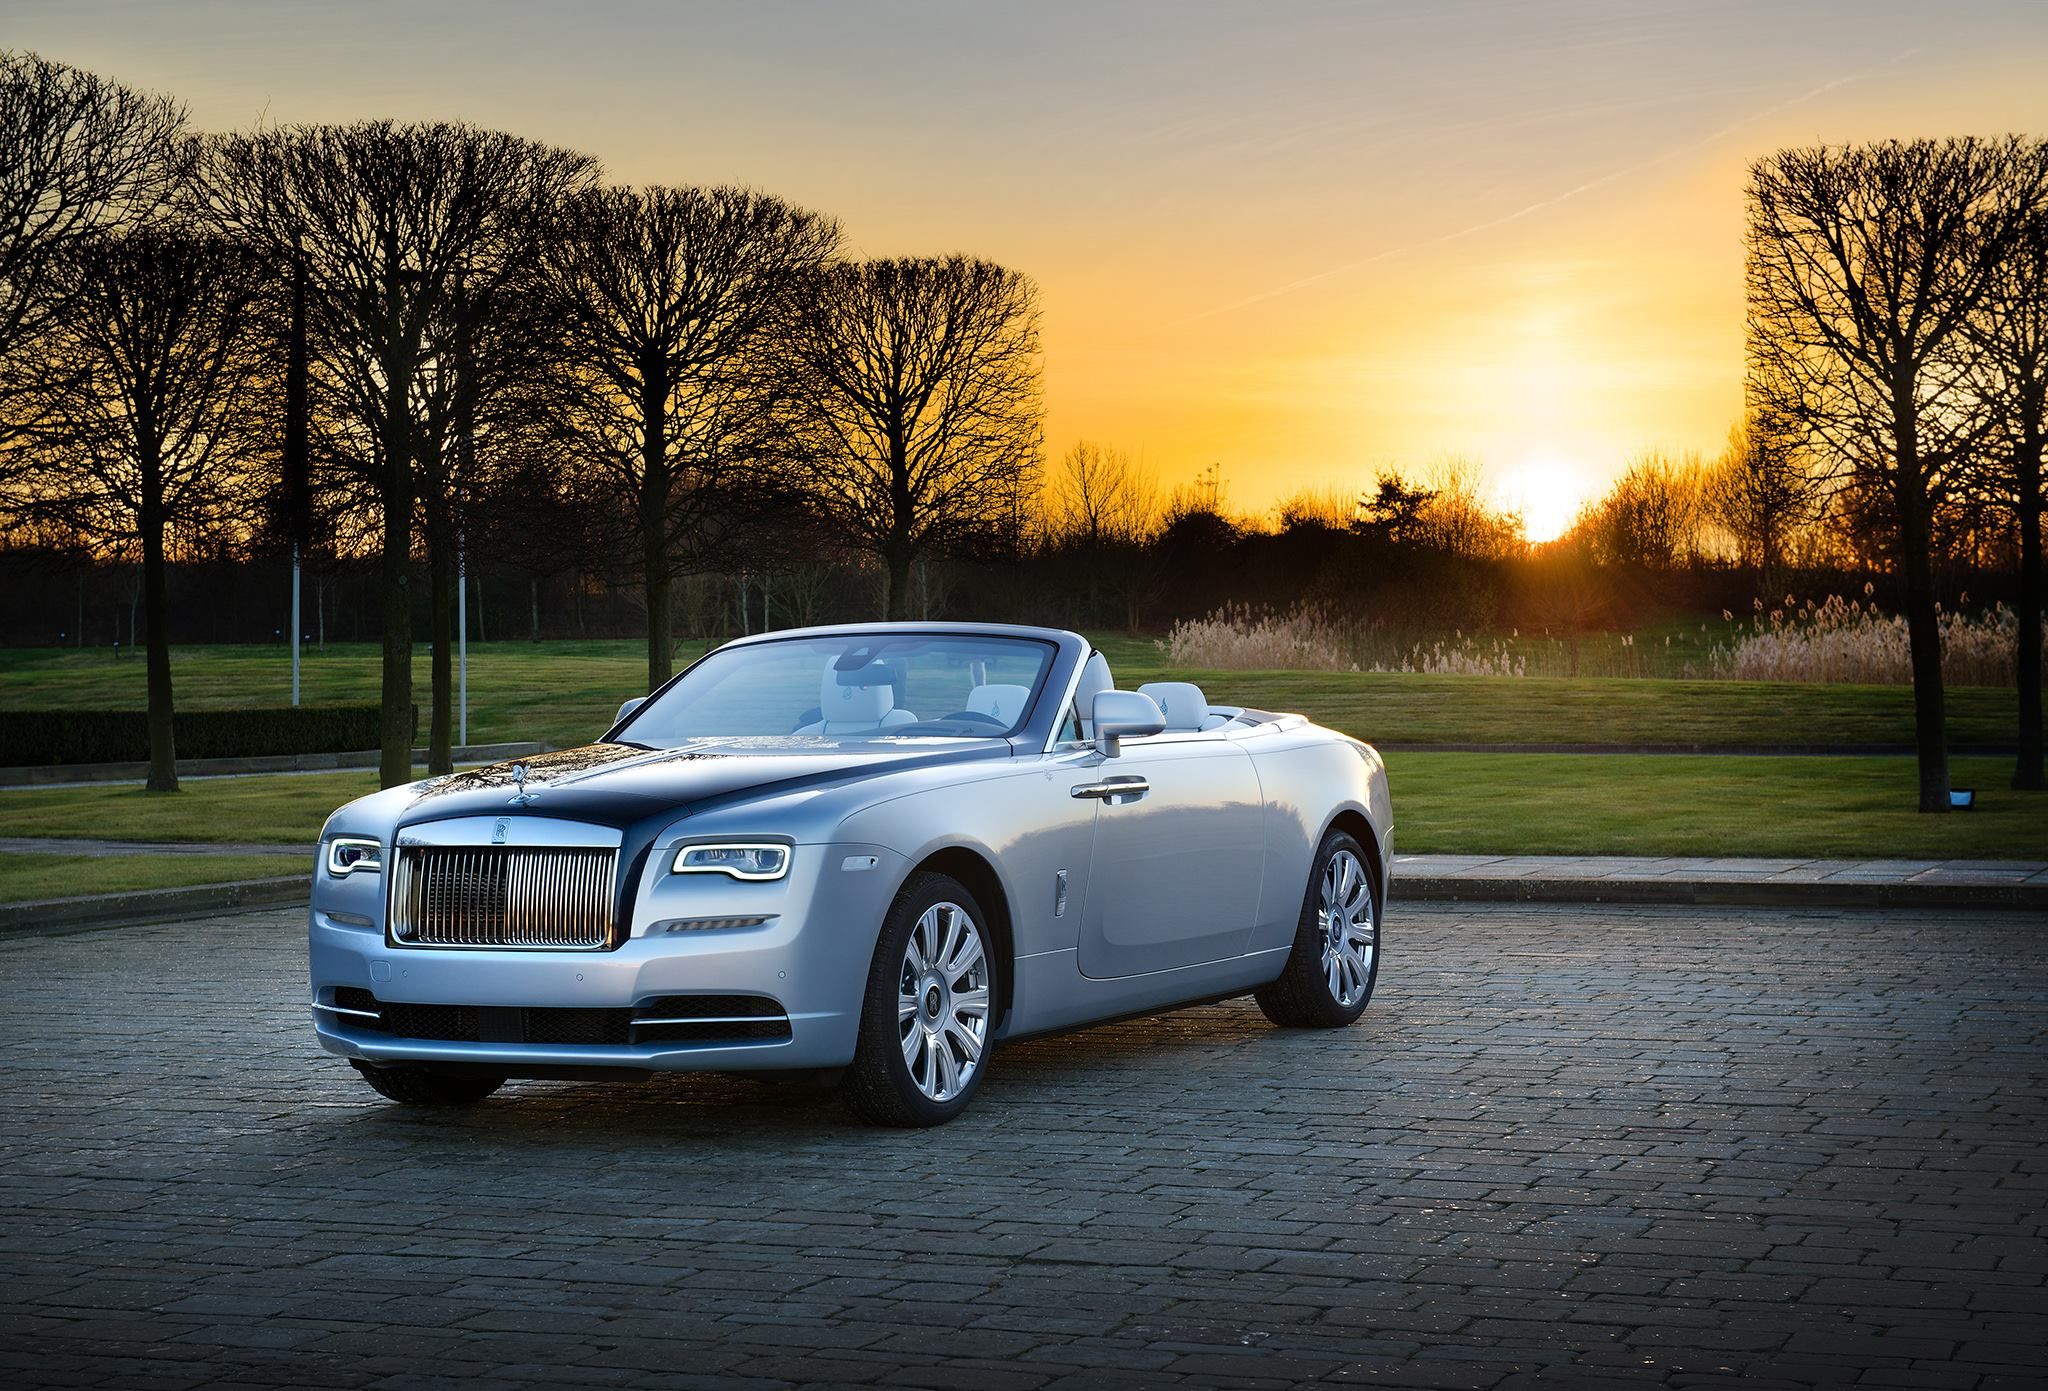 2017 Rolls-Royce Dawn Inspired by Pearling Tradition